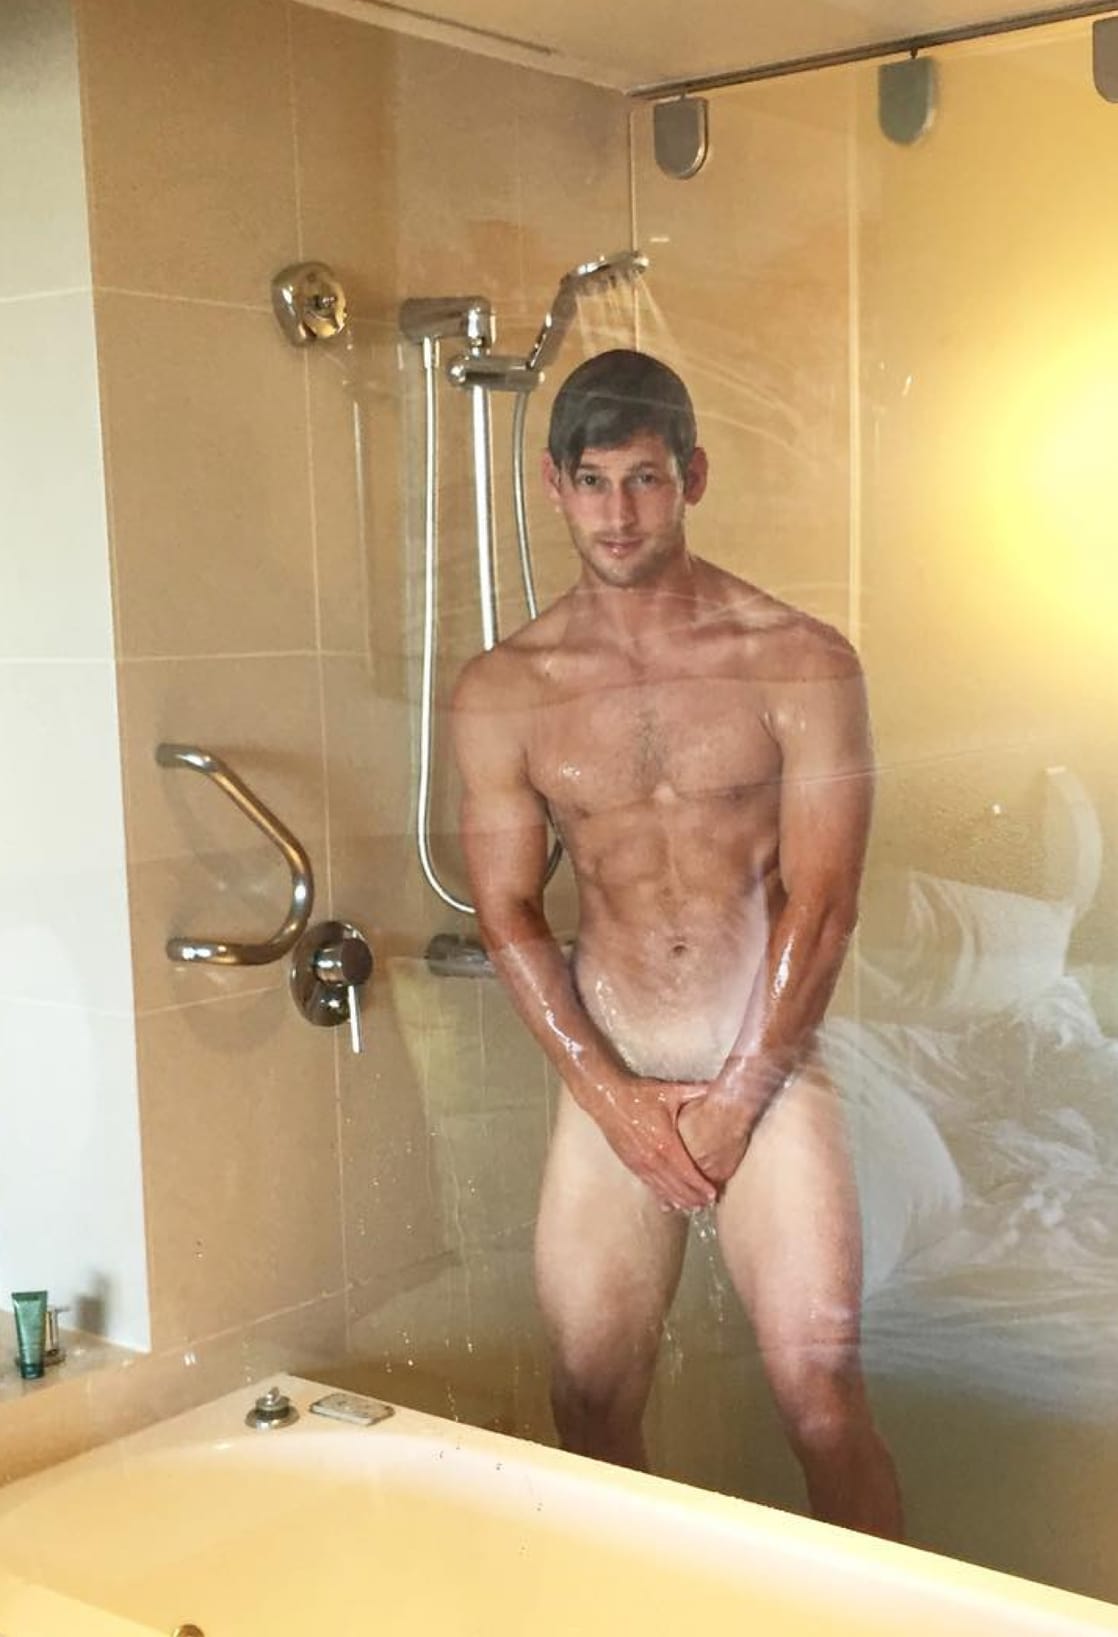 Max emerson nudes ♥ Max Emerson by Joseph Lally Naked Beauty